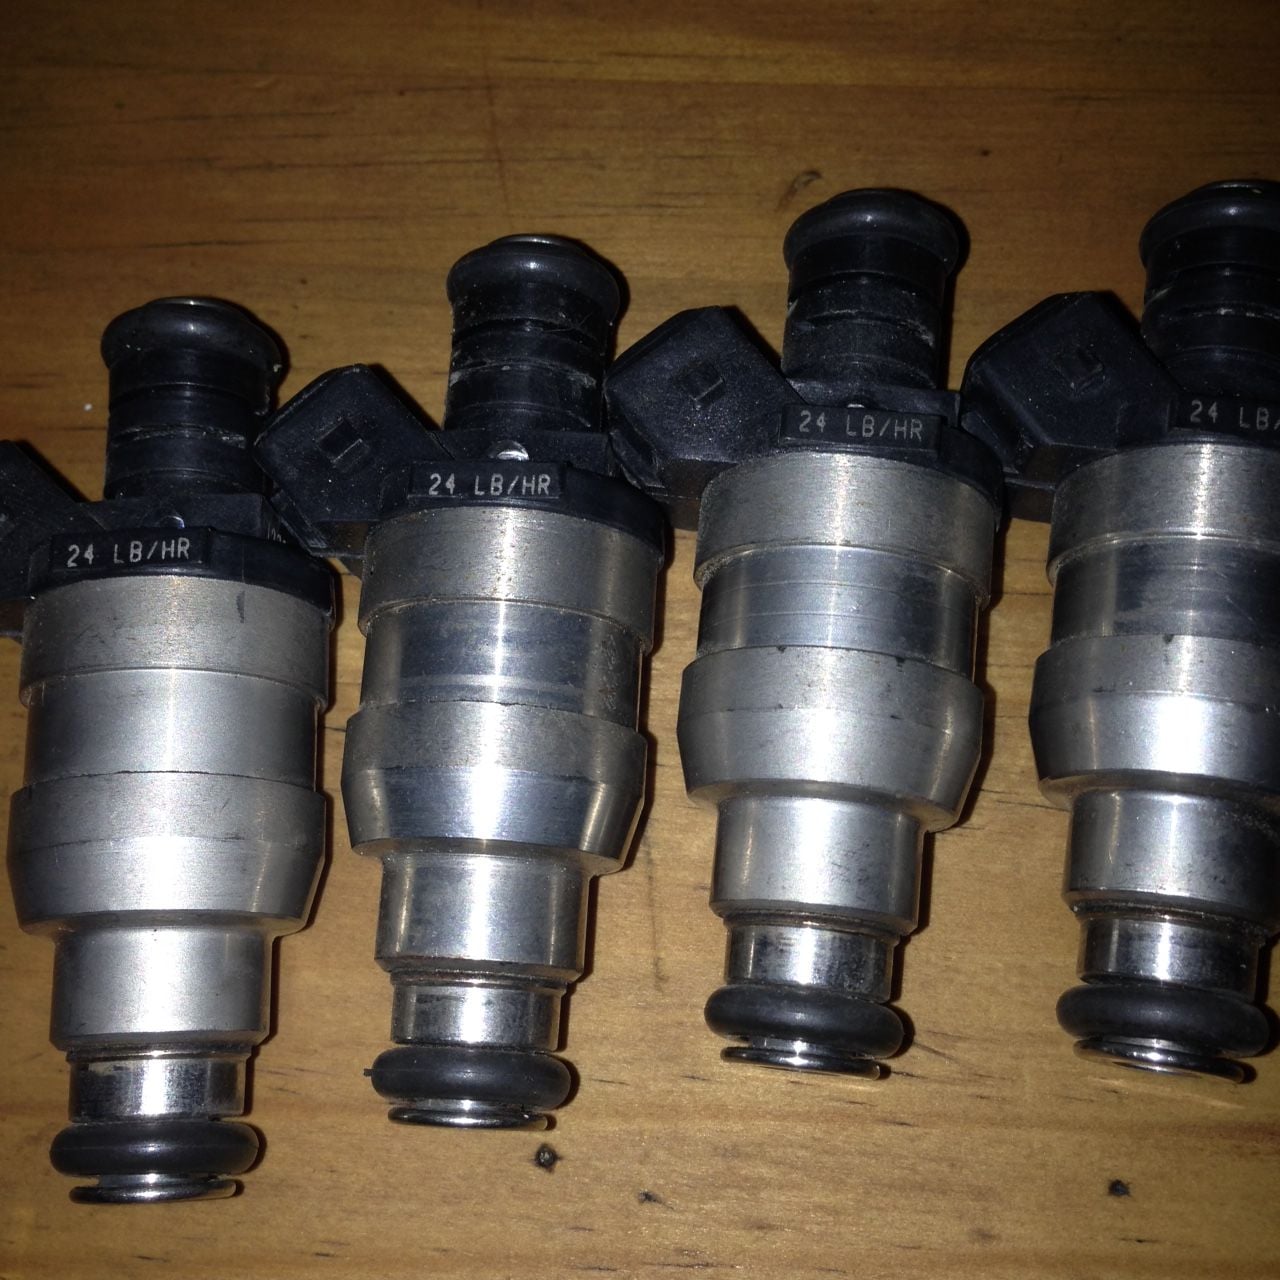 d16y7 high compression pistons